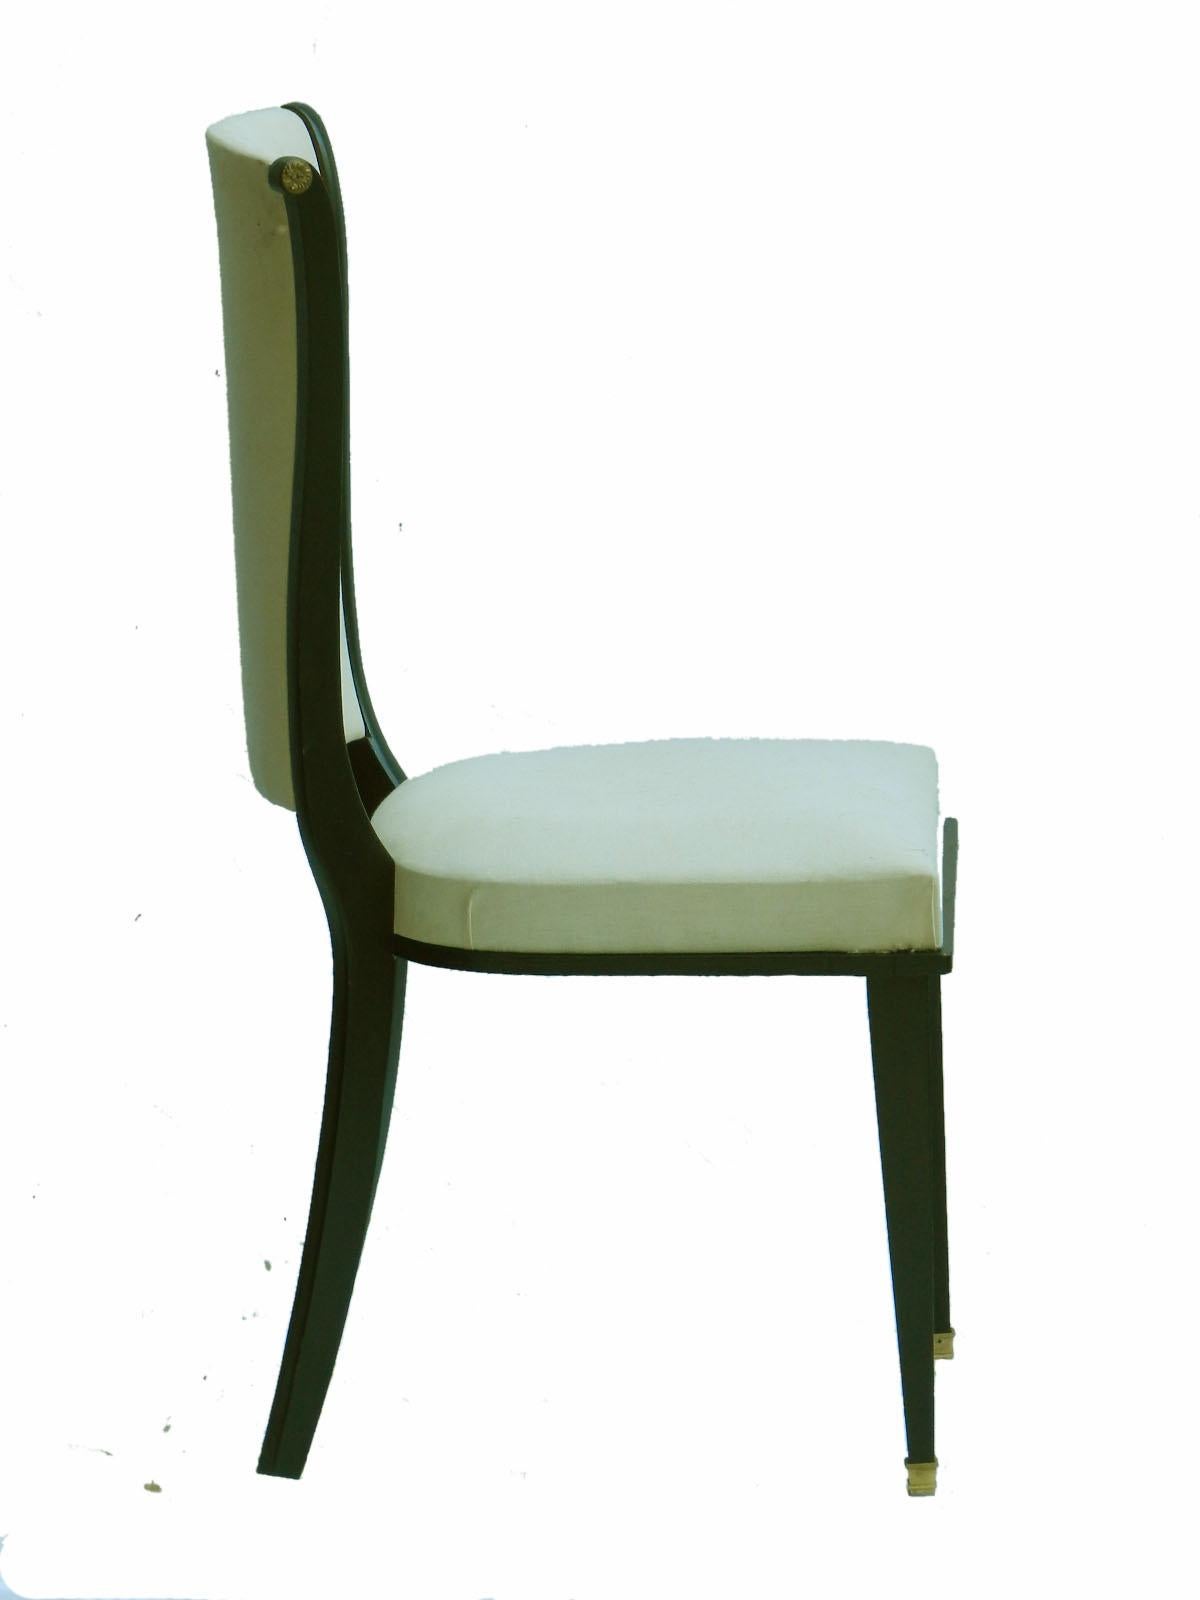 Six dining chairs Art Deco Empire revival French, circa 1940-1960 Mid Century manner of Andre Arbus 
Upholstered and ebonised wood
With brass feet and side roundels
These will be sent covered to 'calico' undercovers ready for top covers 
Or if you